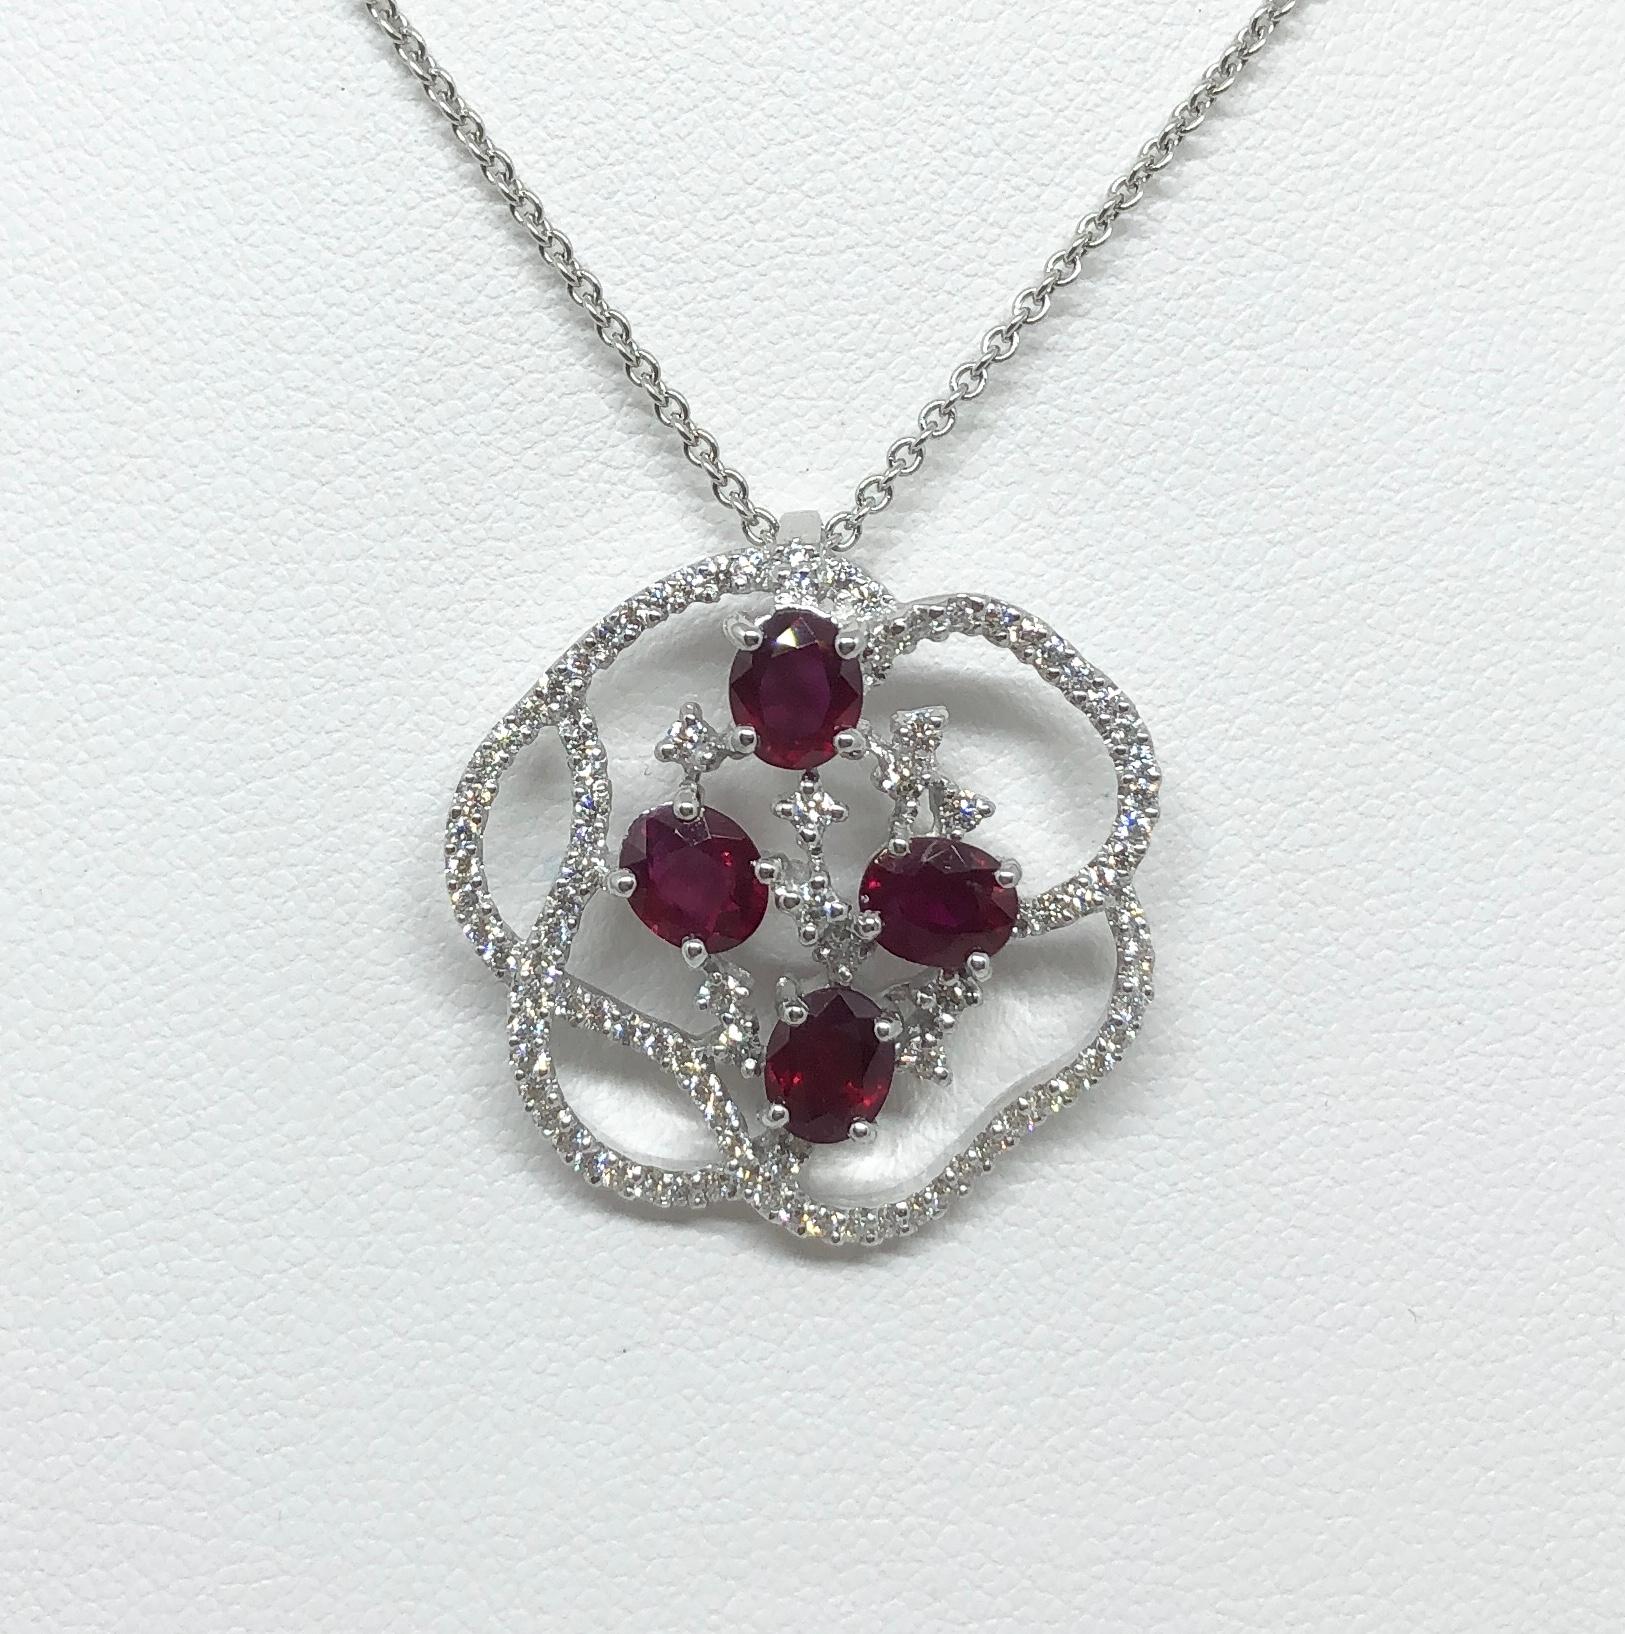 Ruby 2.59 carats with Diamond 0.59 carat Pendant set in 18 Karat White Gold Settings
(chain not included)

Width: 2.5 cm 
Length: 2.5 cm
Total Weight: 5.84 grams

